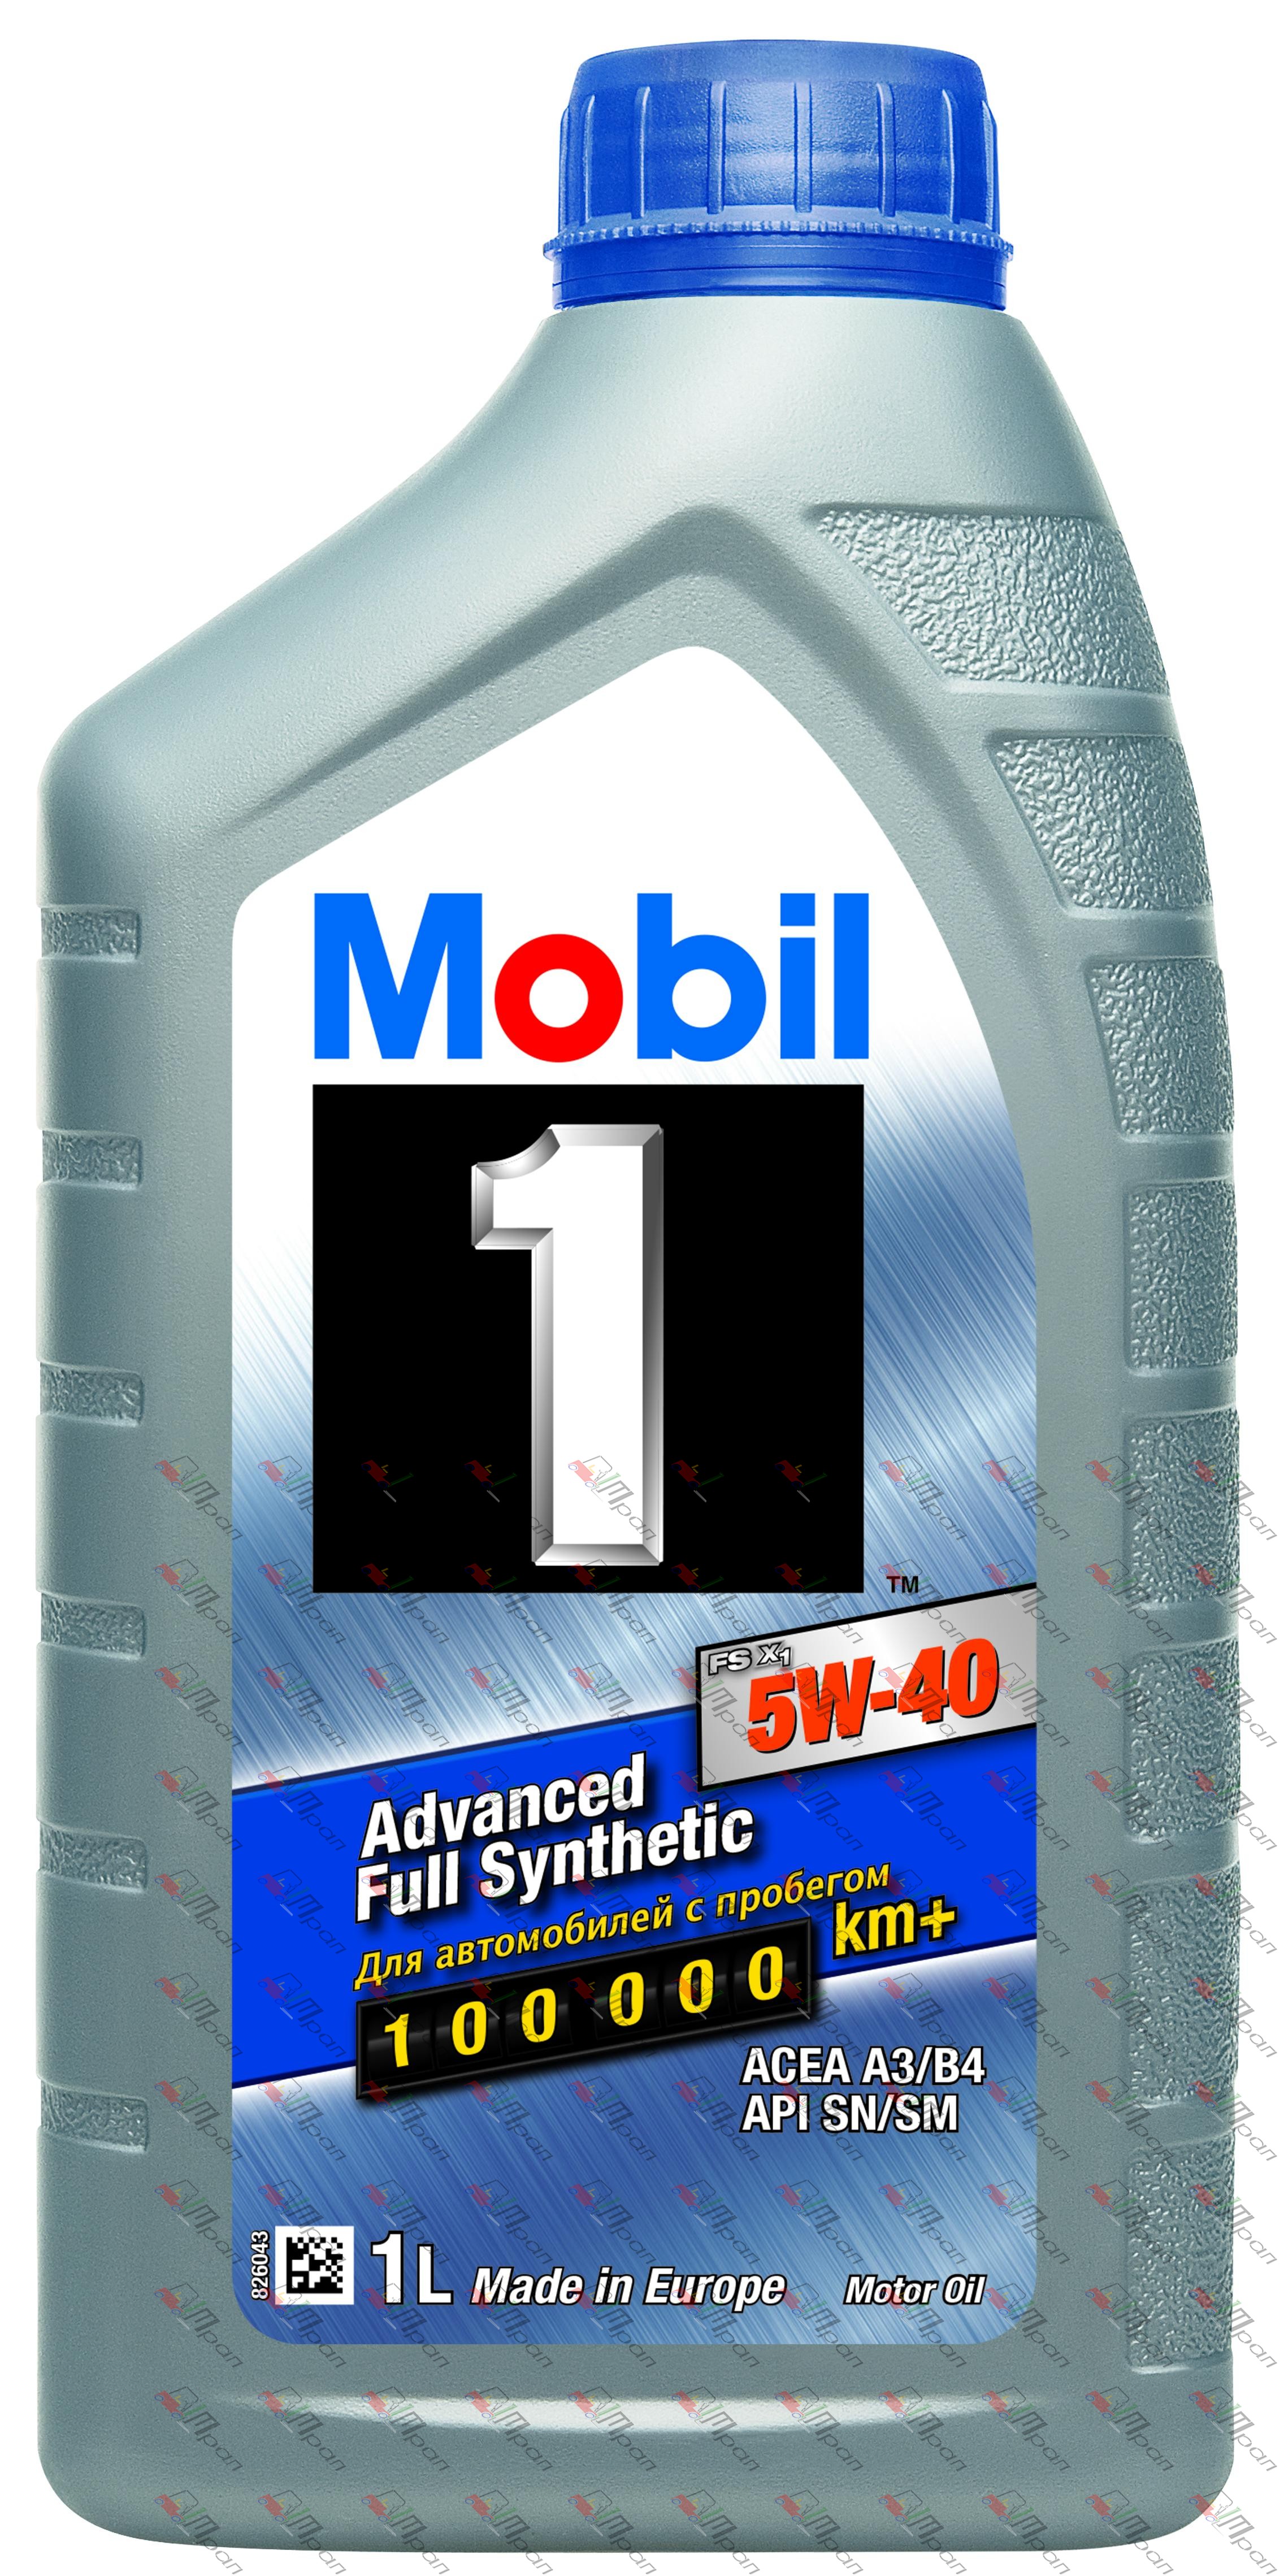 Mobil Масло моторное синтетич. Mobil 1 FS X1 5w40 1л